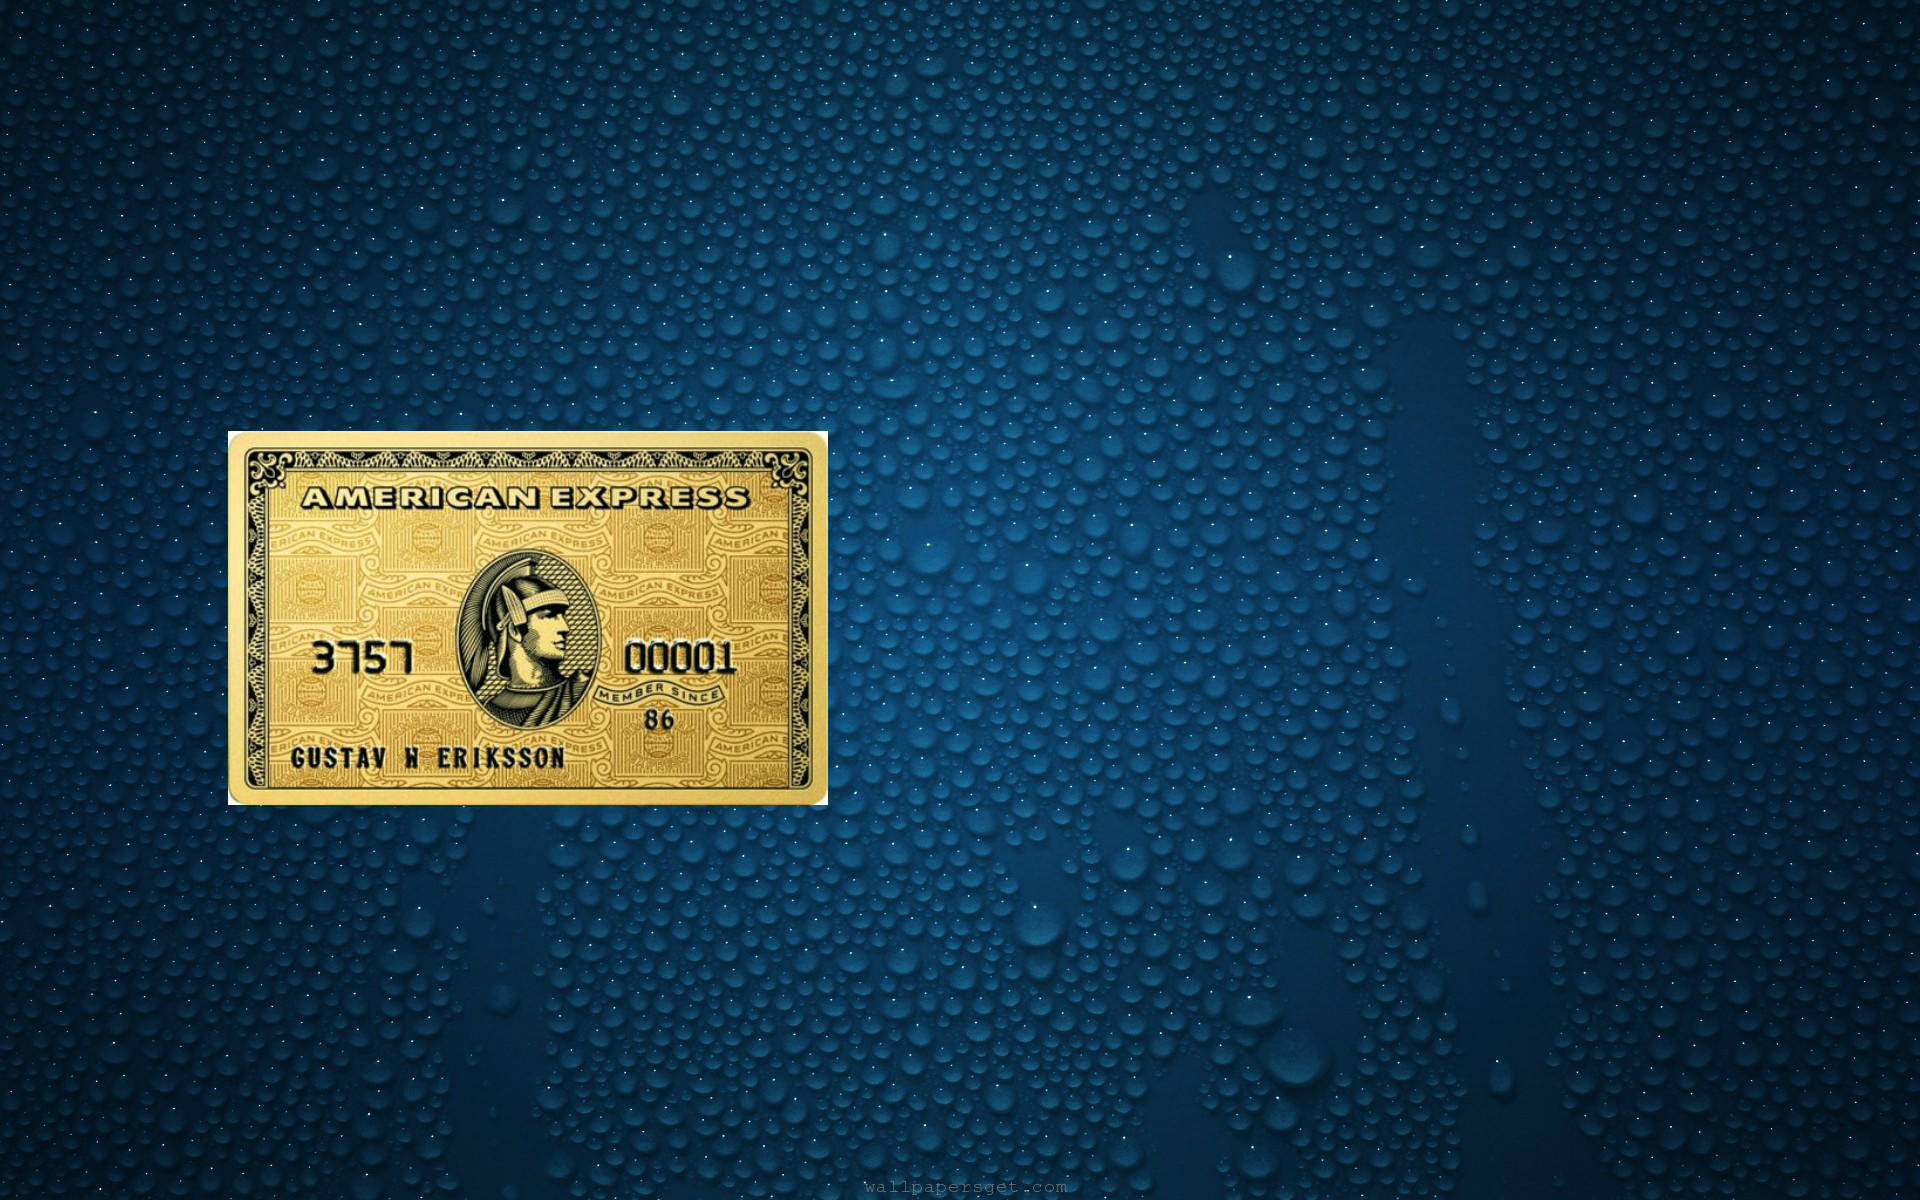 American Express Old Gold Card Wallpaper